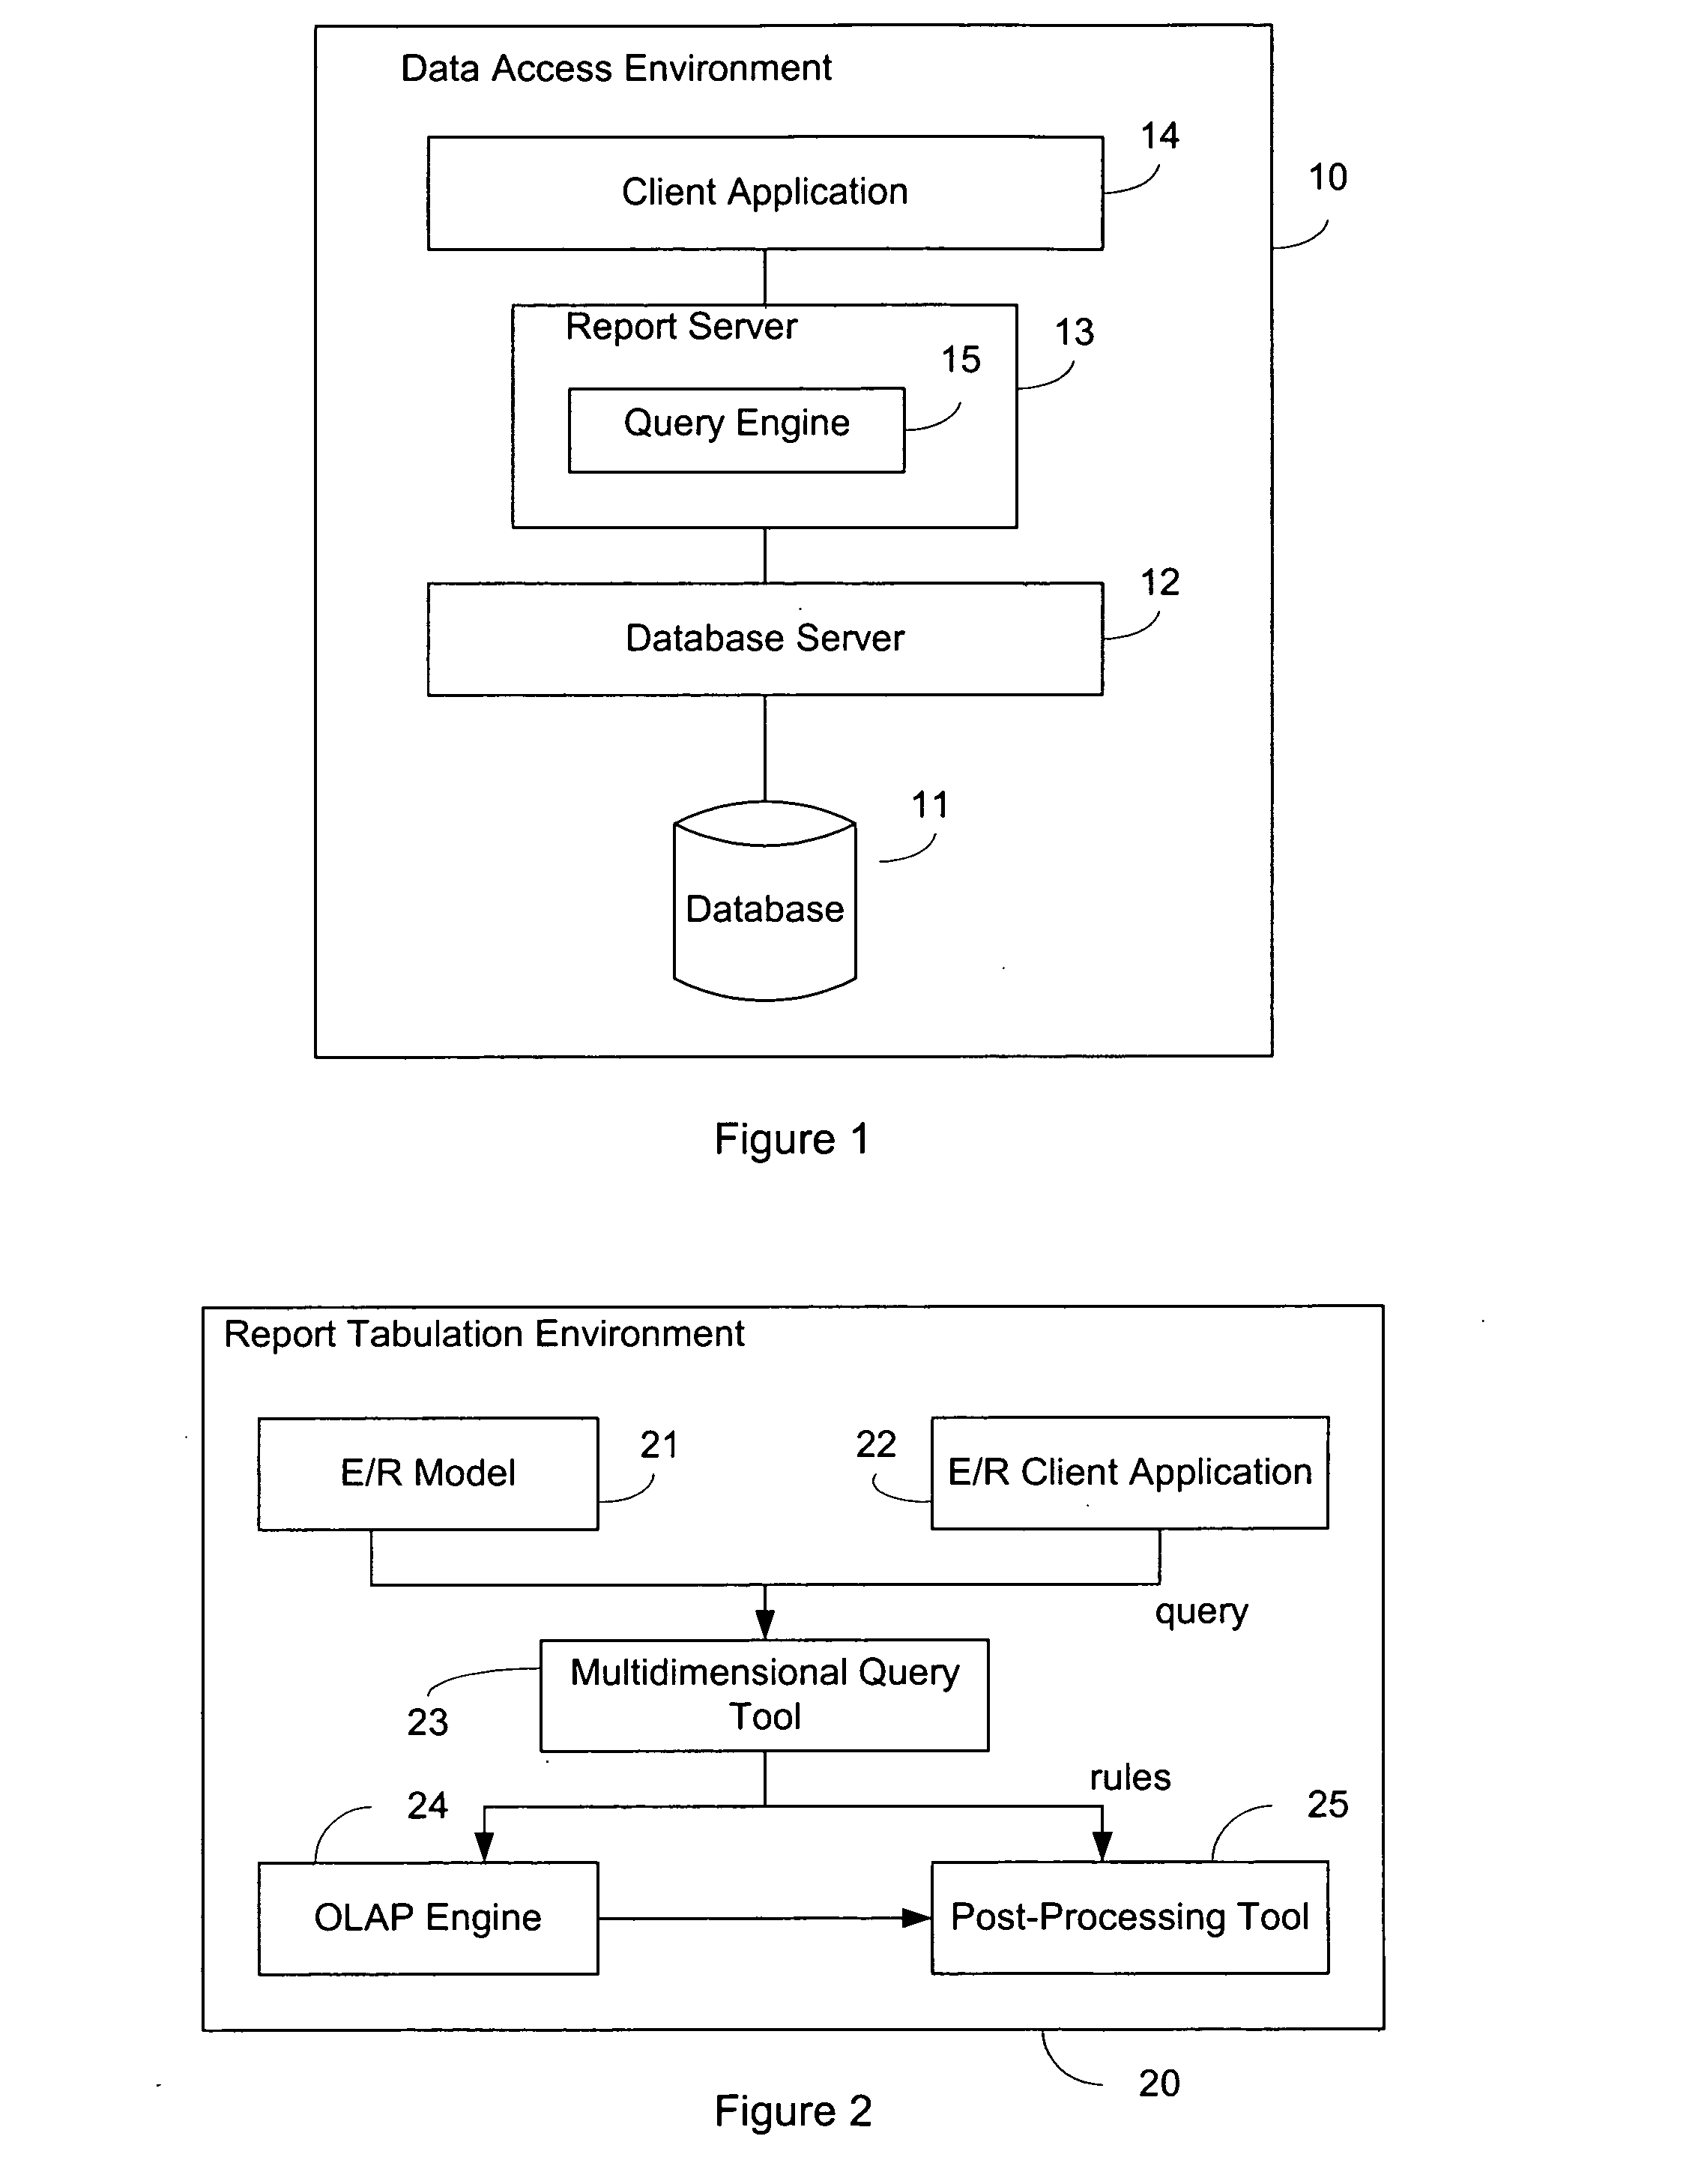 System and method of transforming queries based upon E/R schema into multi-dimensional expression queries